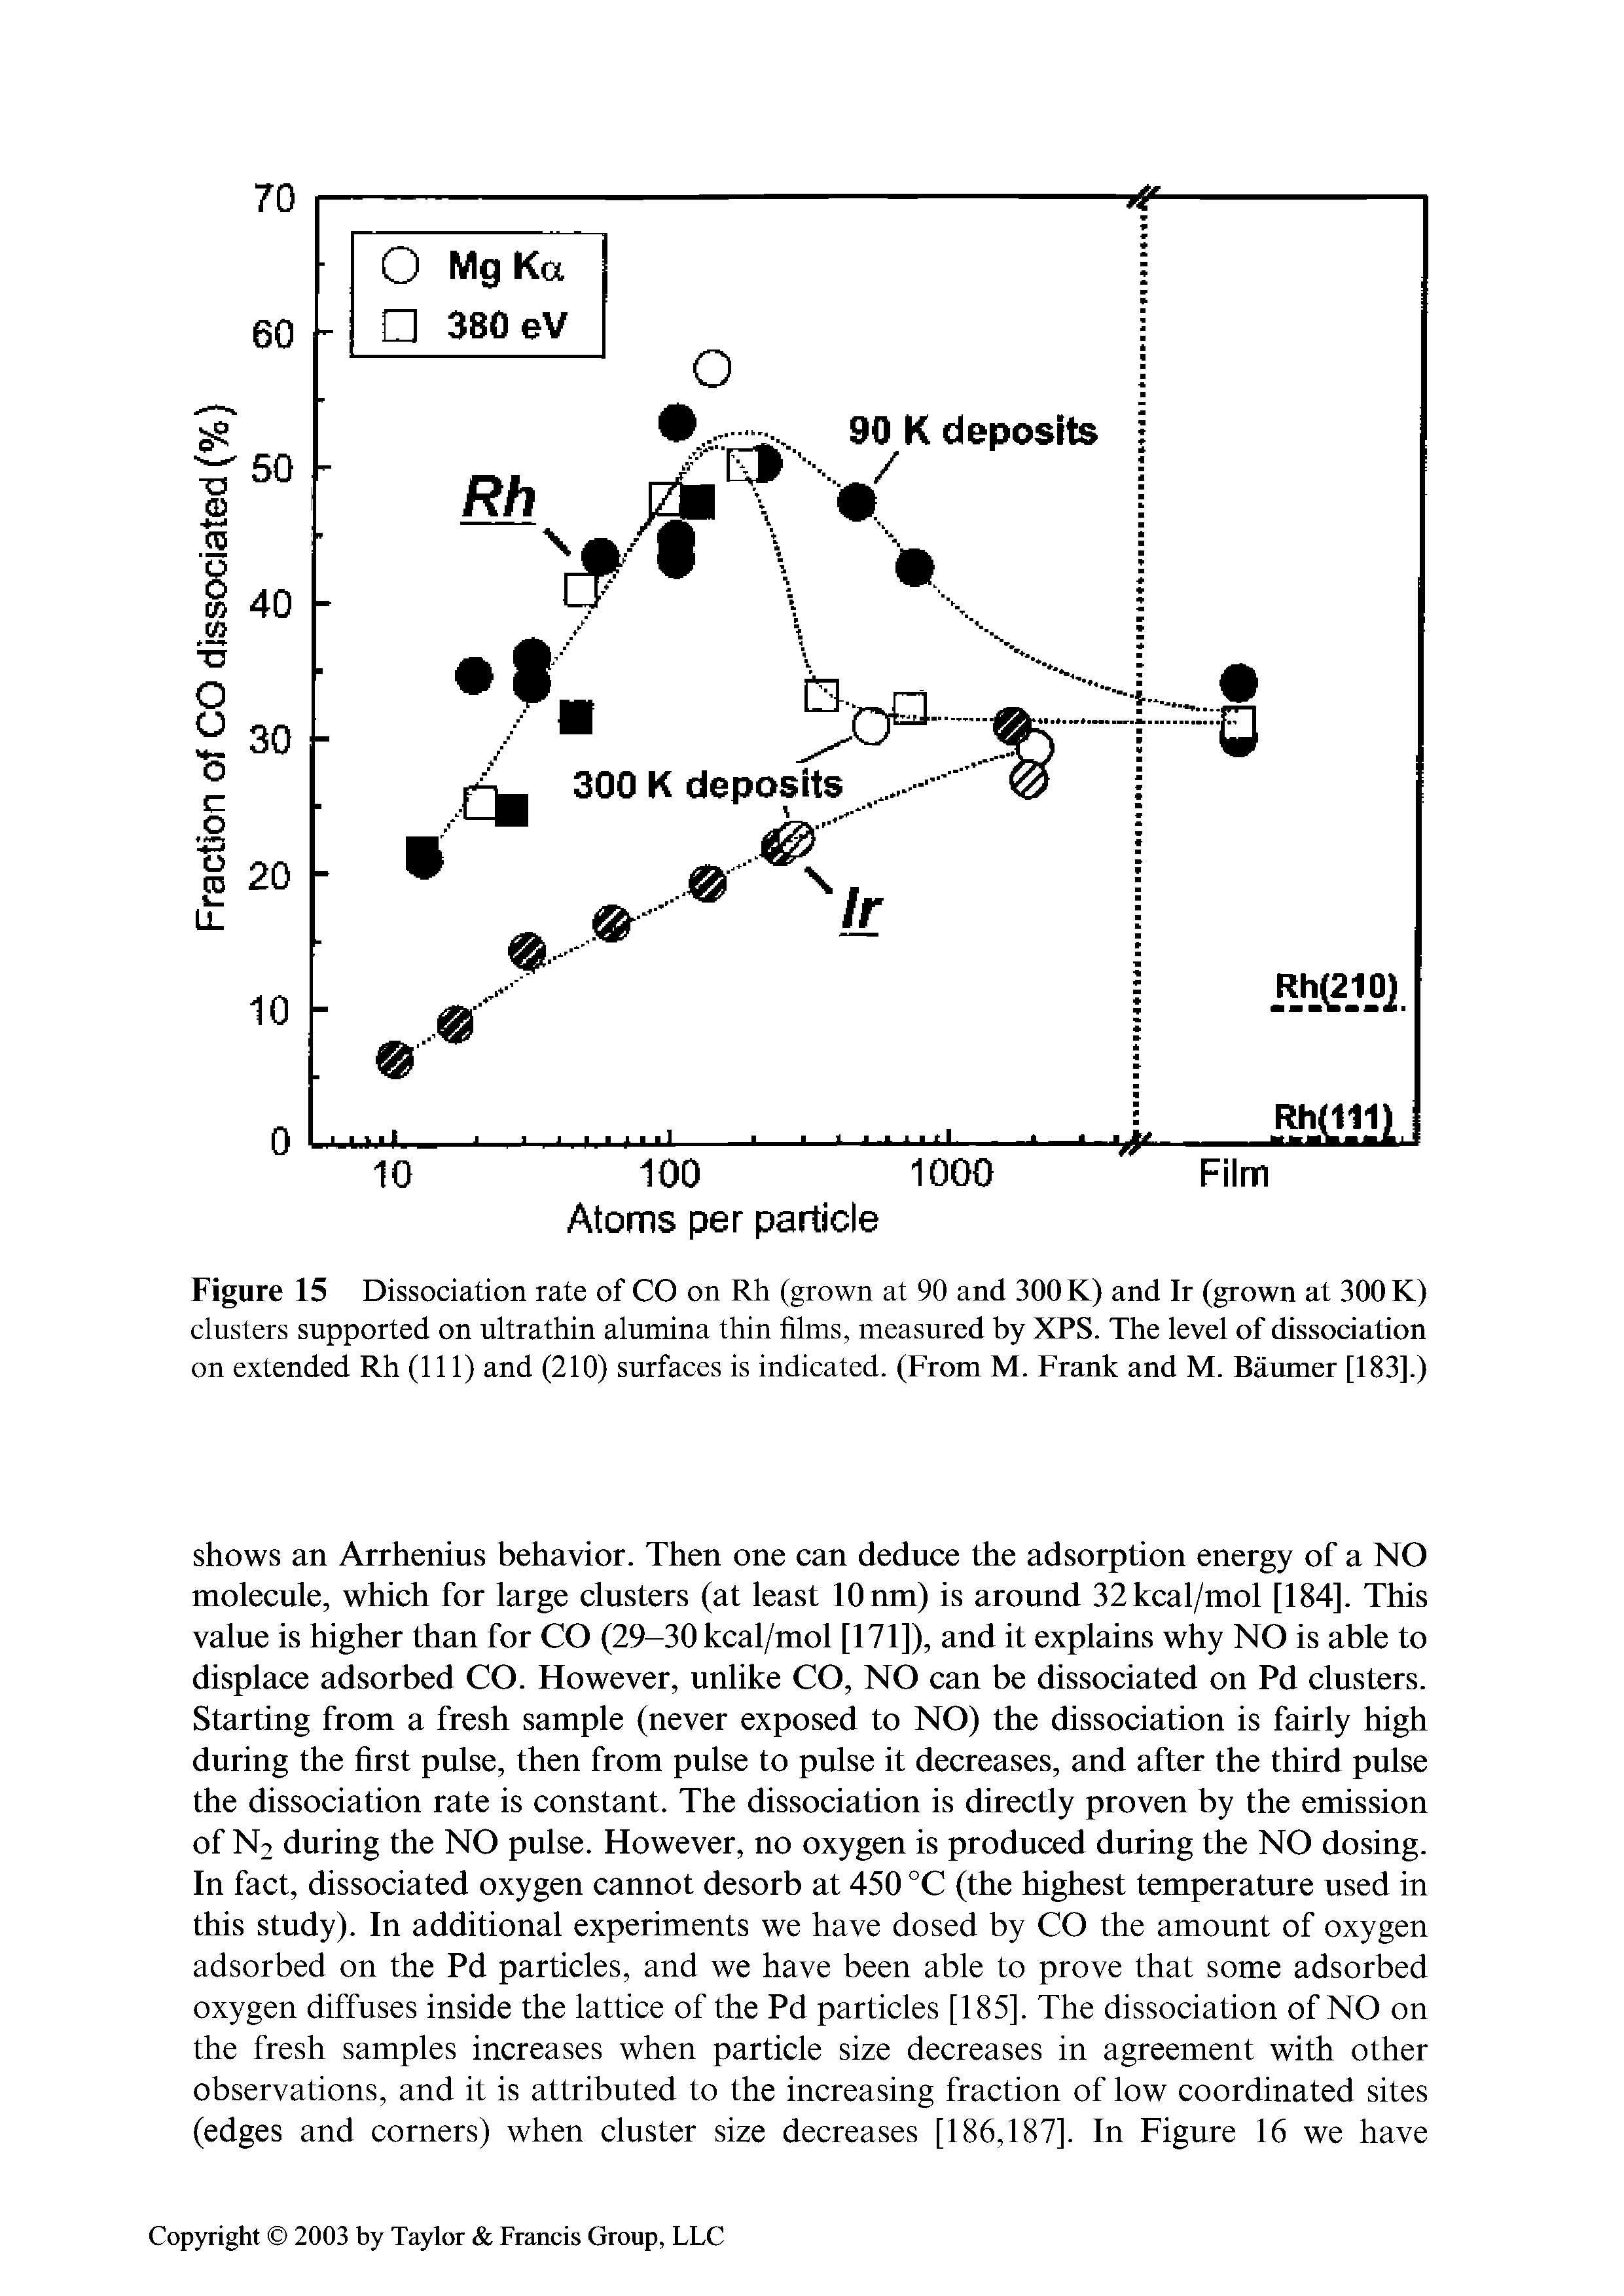 Figure 15 Dissociation rate of CO on Rh (grown at 90 and 300 K) and Ir (grown at 300 K) clusters supported on ultrathin alumina thin films, measured by XPS. The level of dissociation on extended Rh (111) and (210) surfaces is indicated. (From M. Frank and M. Baumer [183].)...